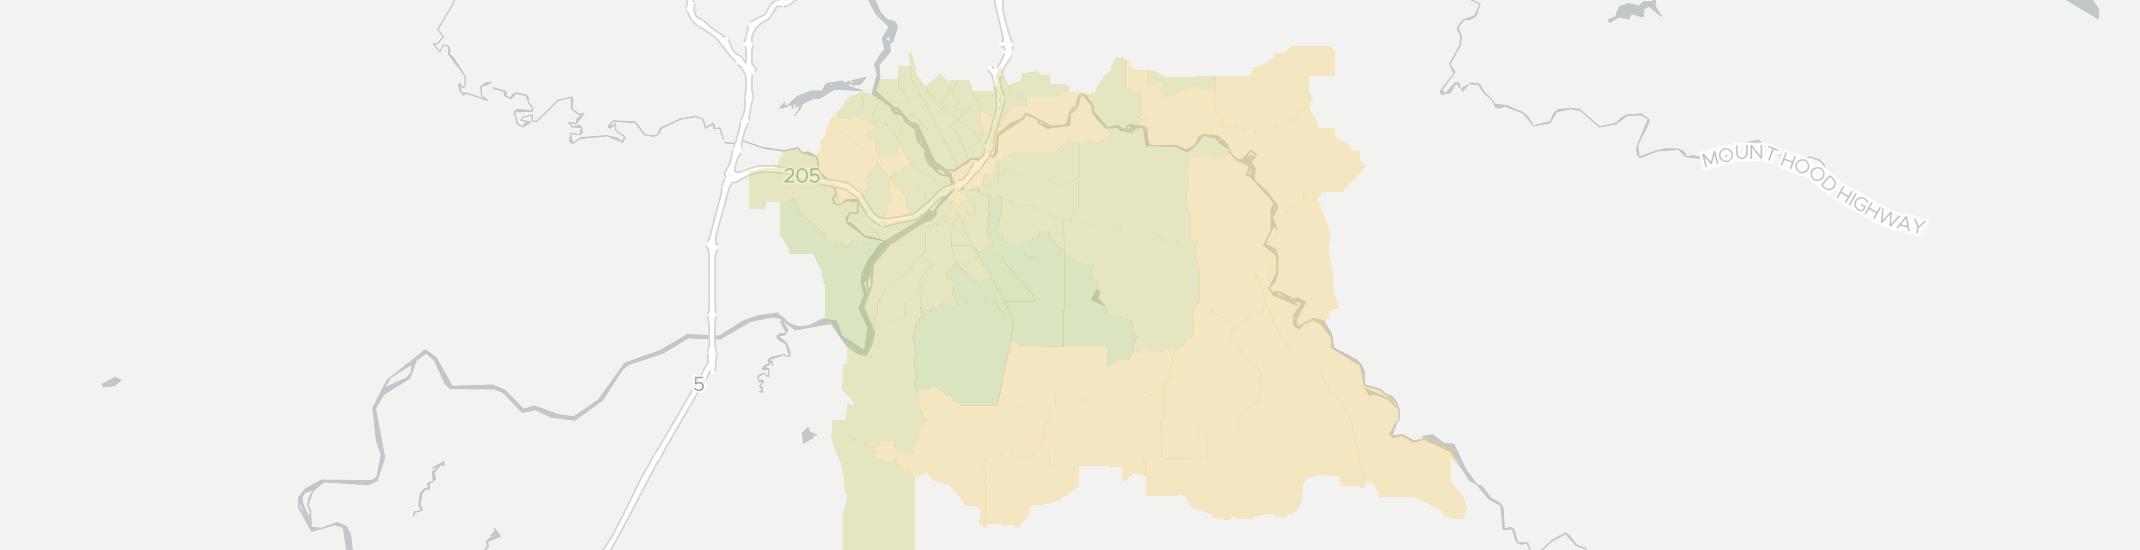 Oregon City Internet Competition Map. Click for interactive map.